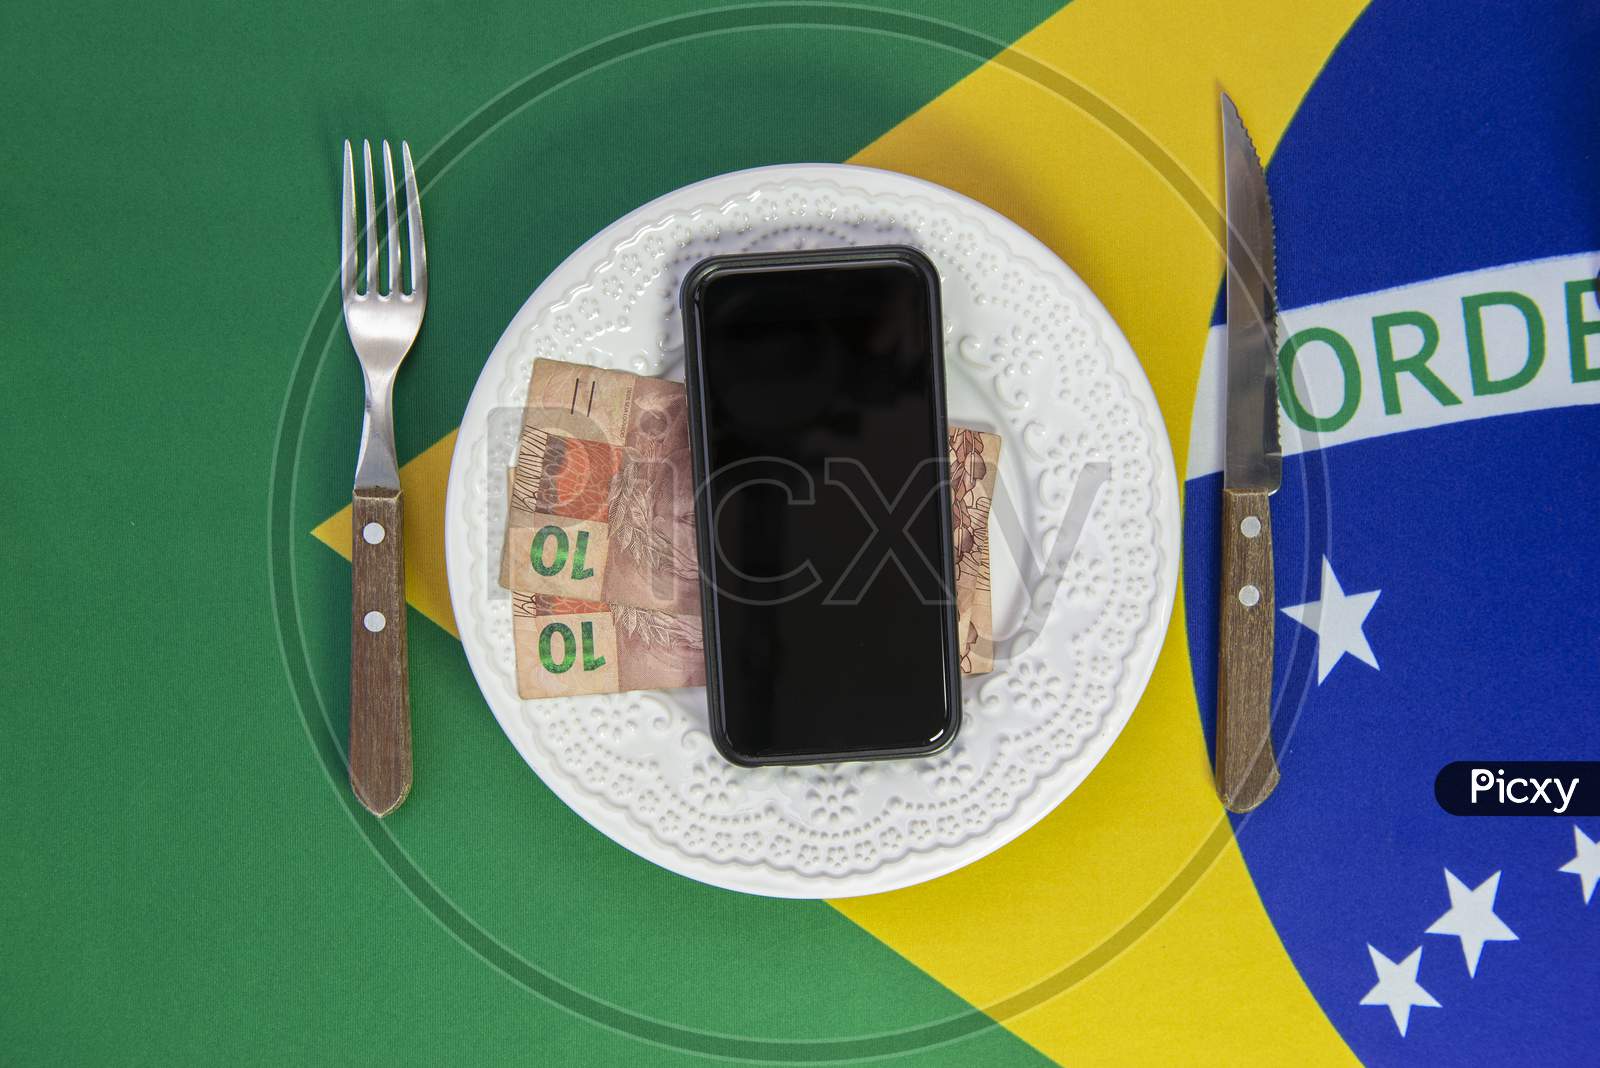 Top View Of Cellular Over Food Plate Next To Cutlery And Brazilian Flag In The Background. Mobile Phone With Black Screen.